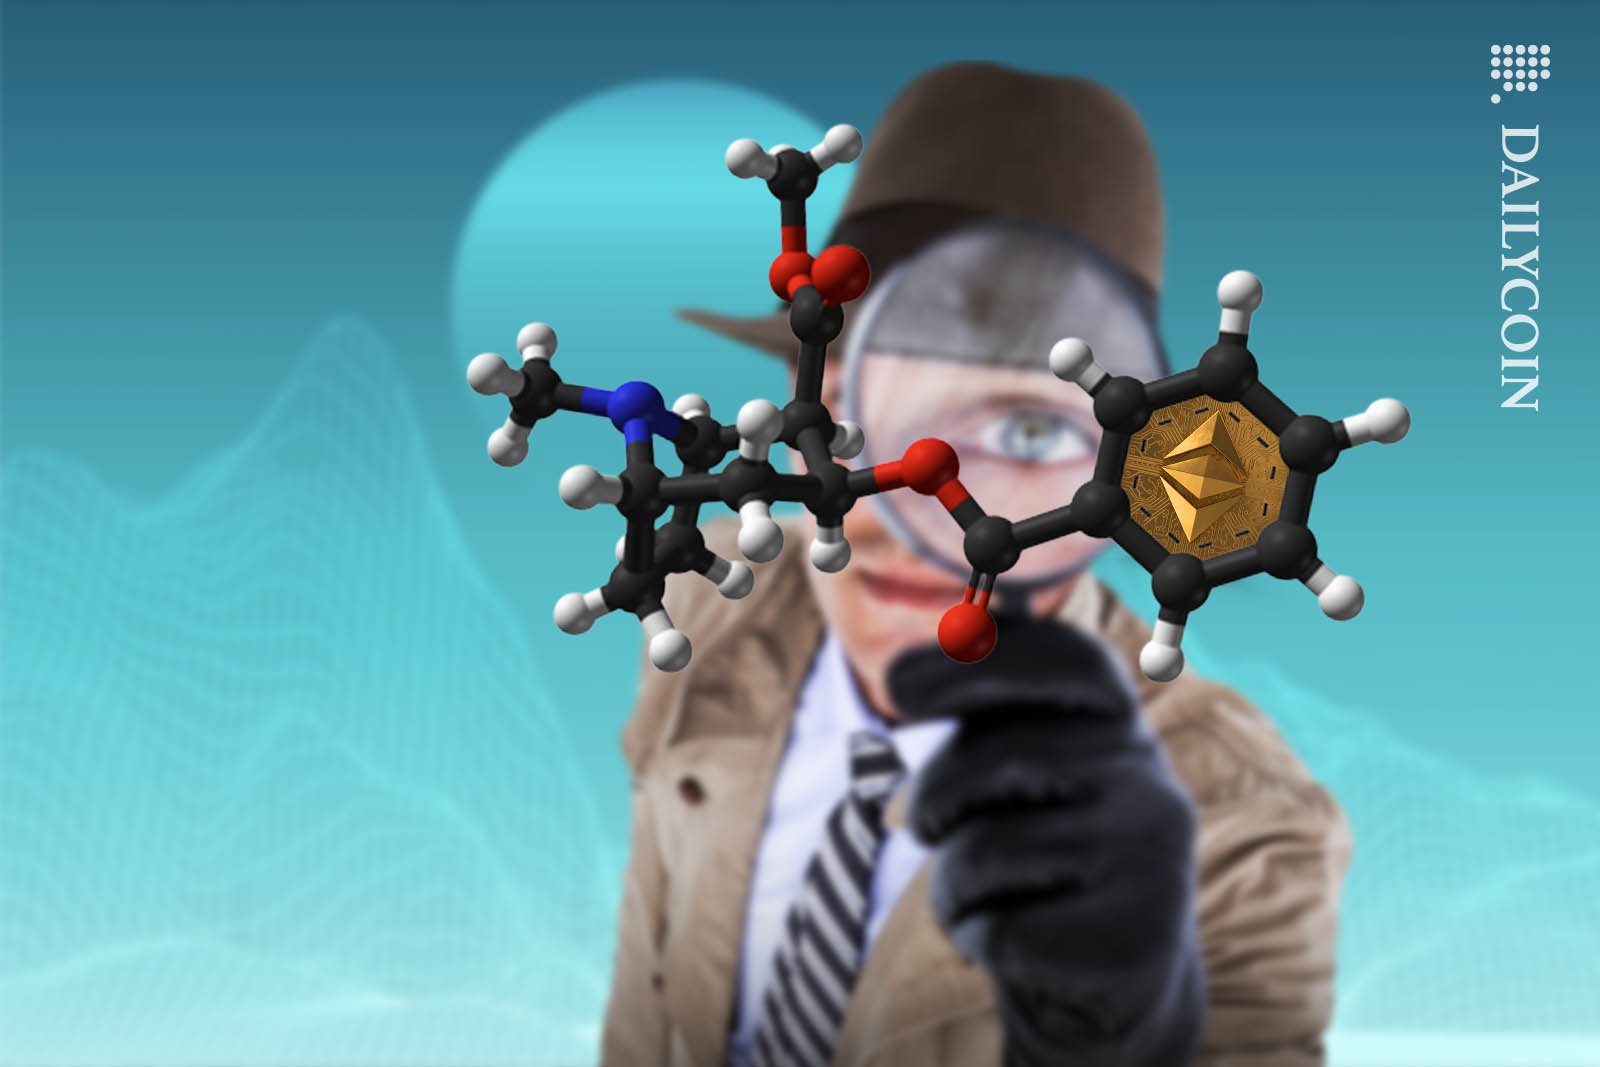 Detective with magnifying glass inspecting a Ball-and-stick model of the cocaine molecule, C17H21N1O4, enhaced by an Ethereum coin.